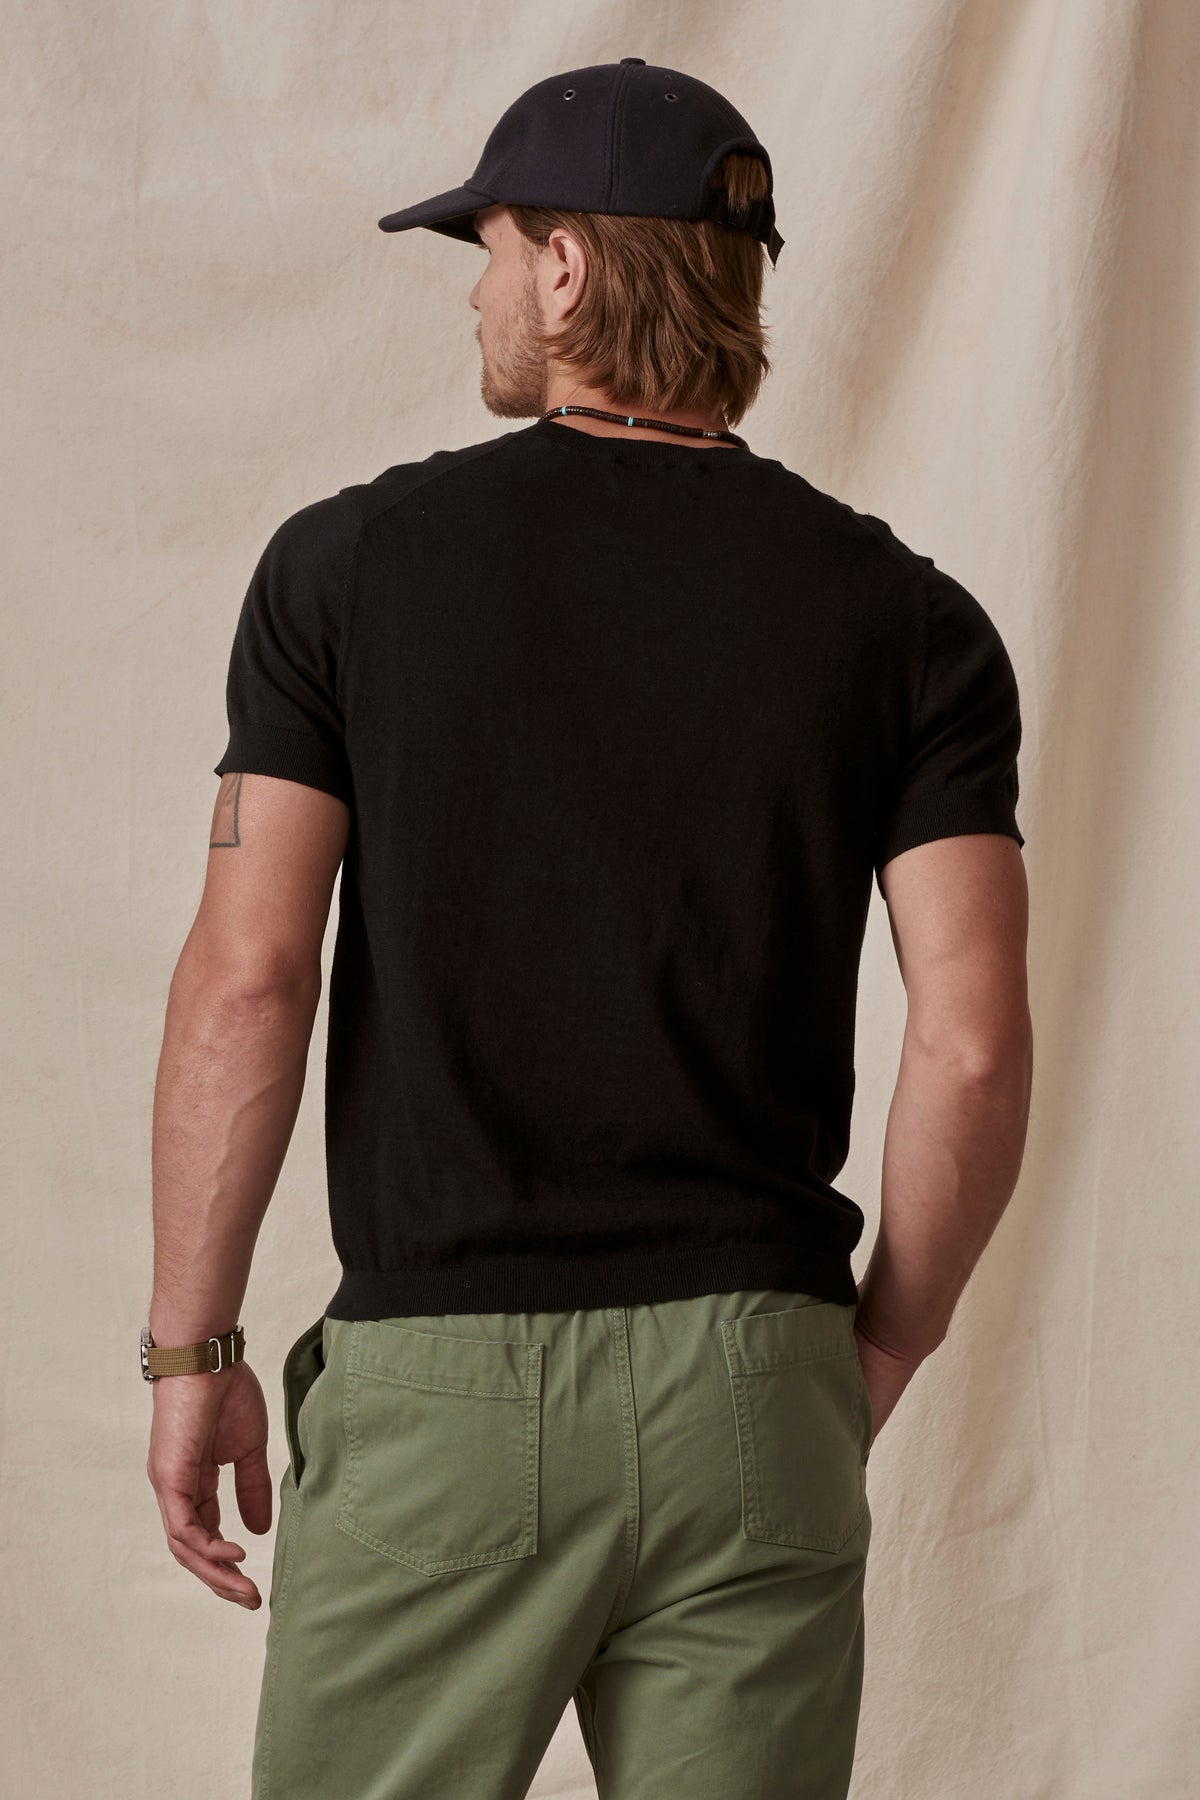 A man viewed from the back, wearing a black cotton/linen blend t-shirt (DEXTER CREW by Velvet by Graham & Spencer) and green pants, with a baseball cap, standing against a beige backdrop.-36753529372865